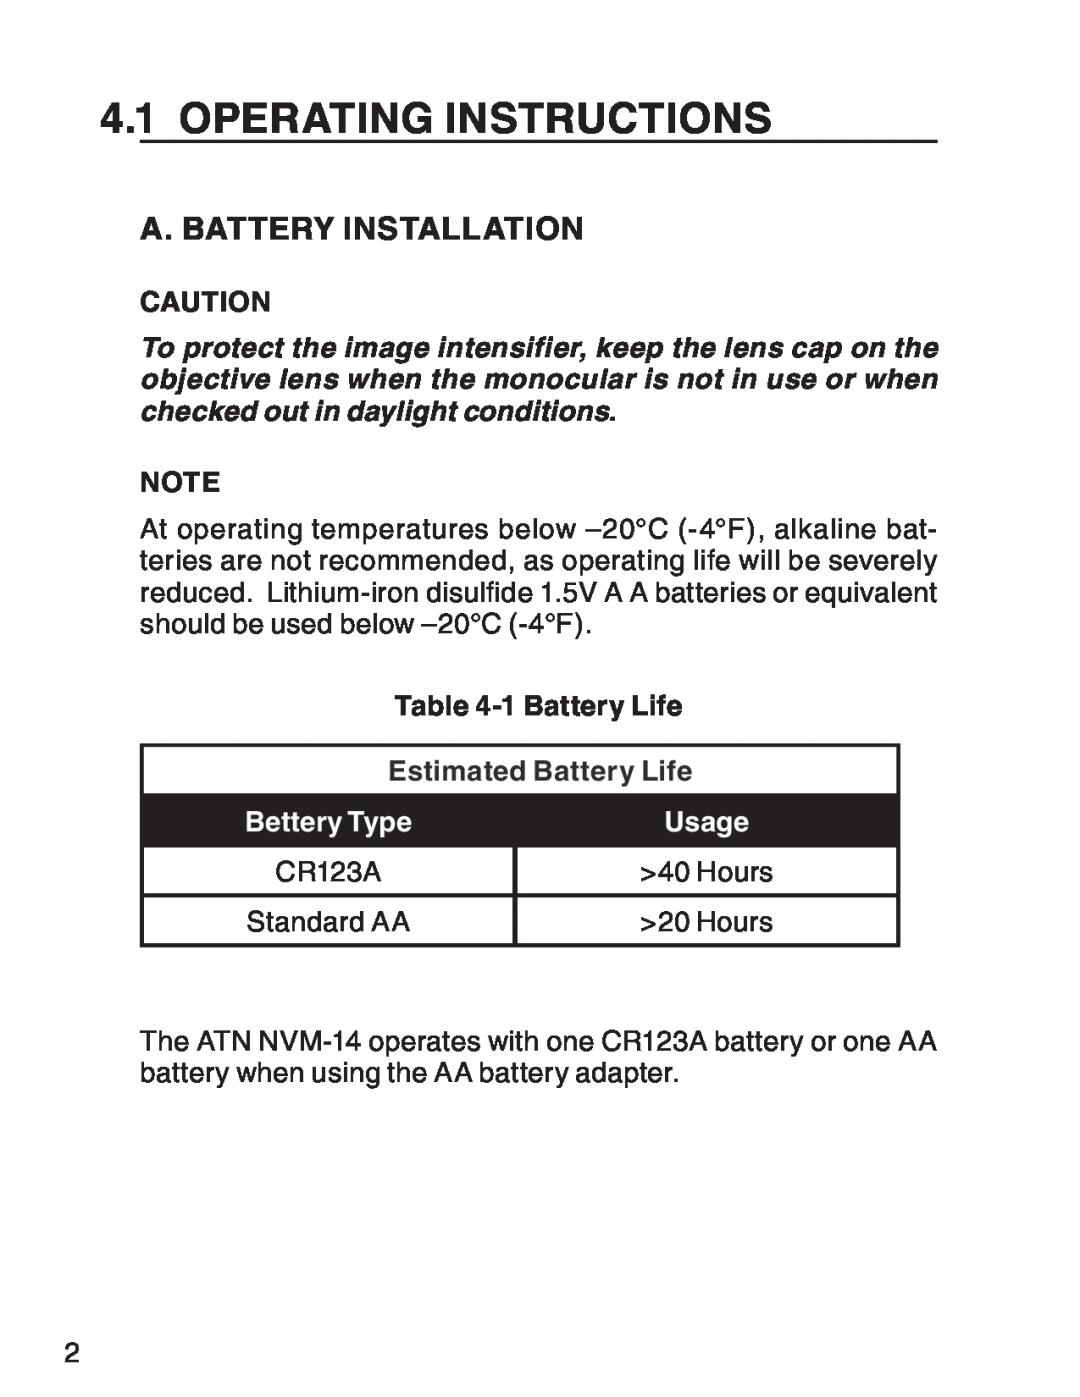 ATN 3 manual Operating Instructions, a. Battery Installation, 1 Battery Life, Estimated Battery Life, Bettery Type, Usage 